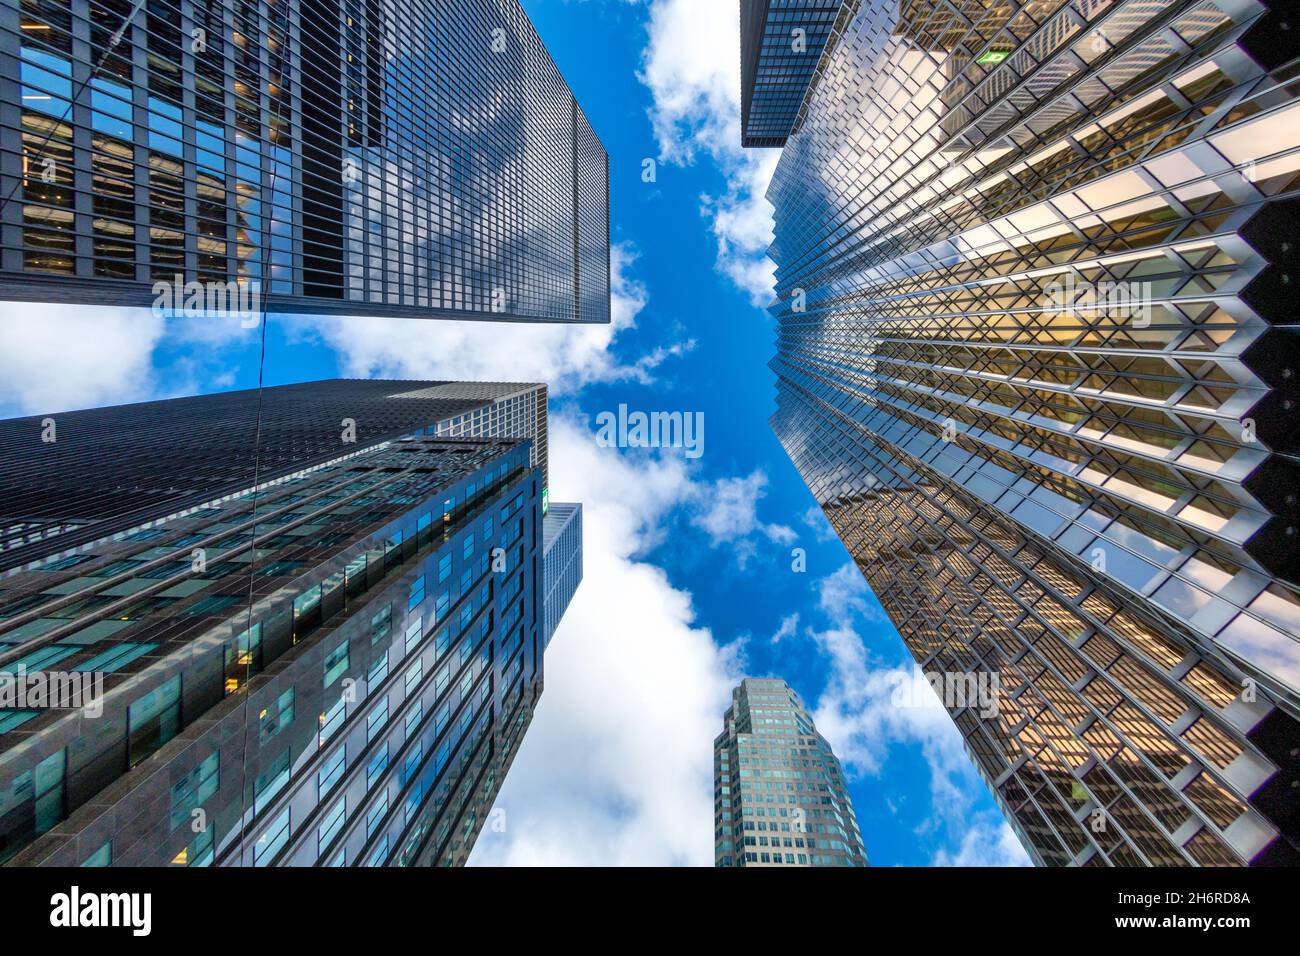 Directly below the skyscraper buildings in the financial district in the downtown of Toronto, Canada. Nov. 17, 2021 Stock Photo